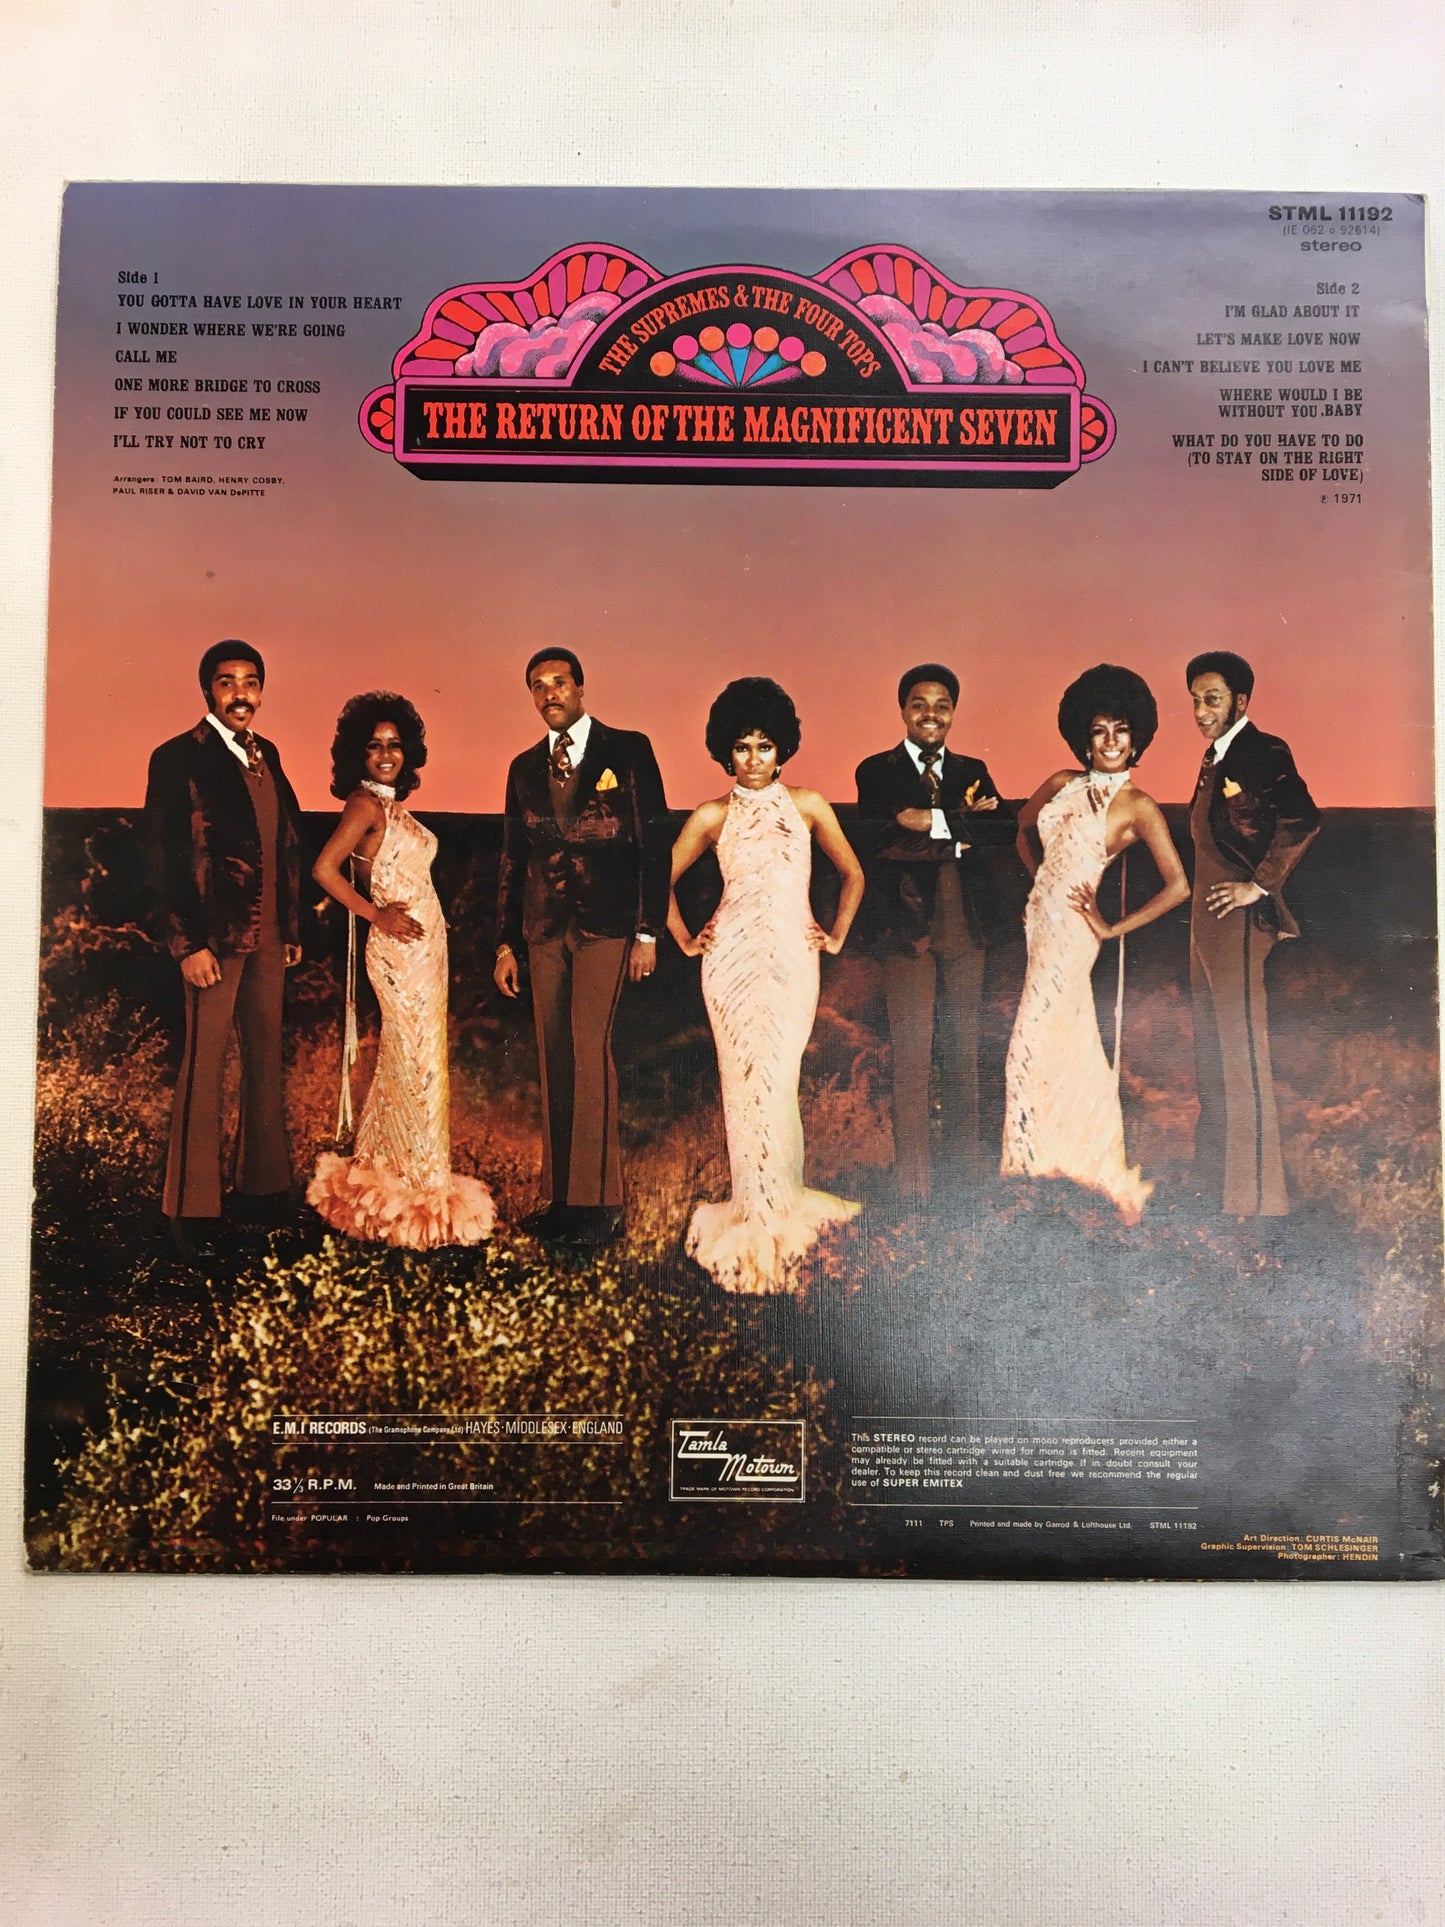 The SUPREMES & The FOUR TOPS LP ; THE RETURN OF THE MAGNIFICENT SEVEN